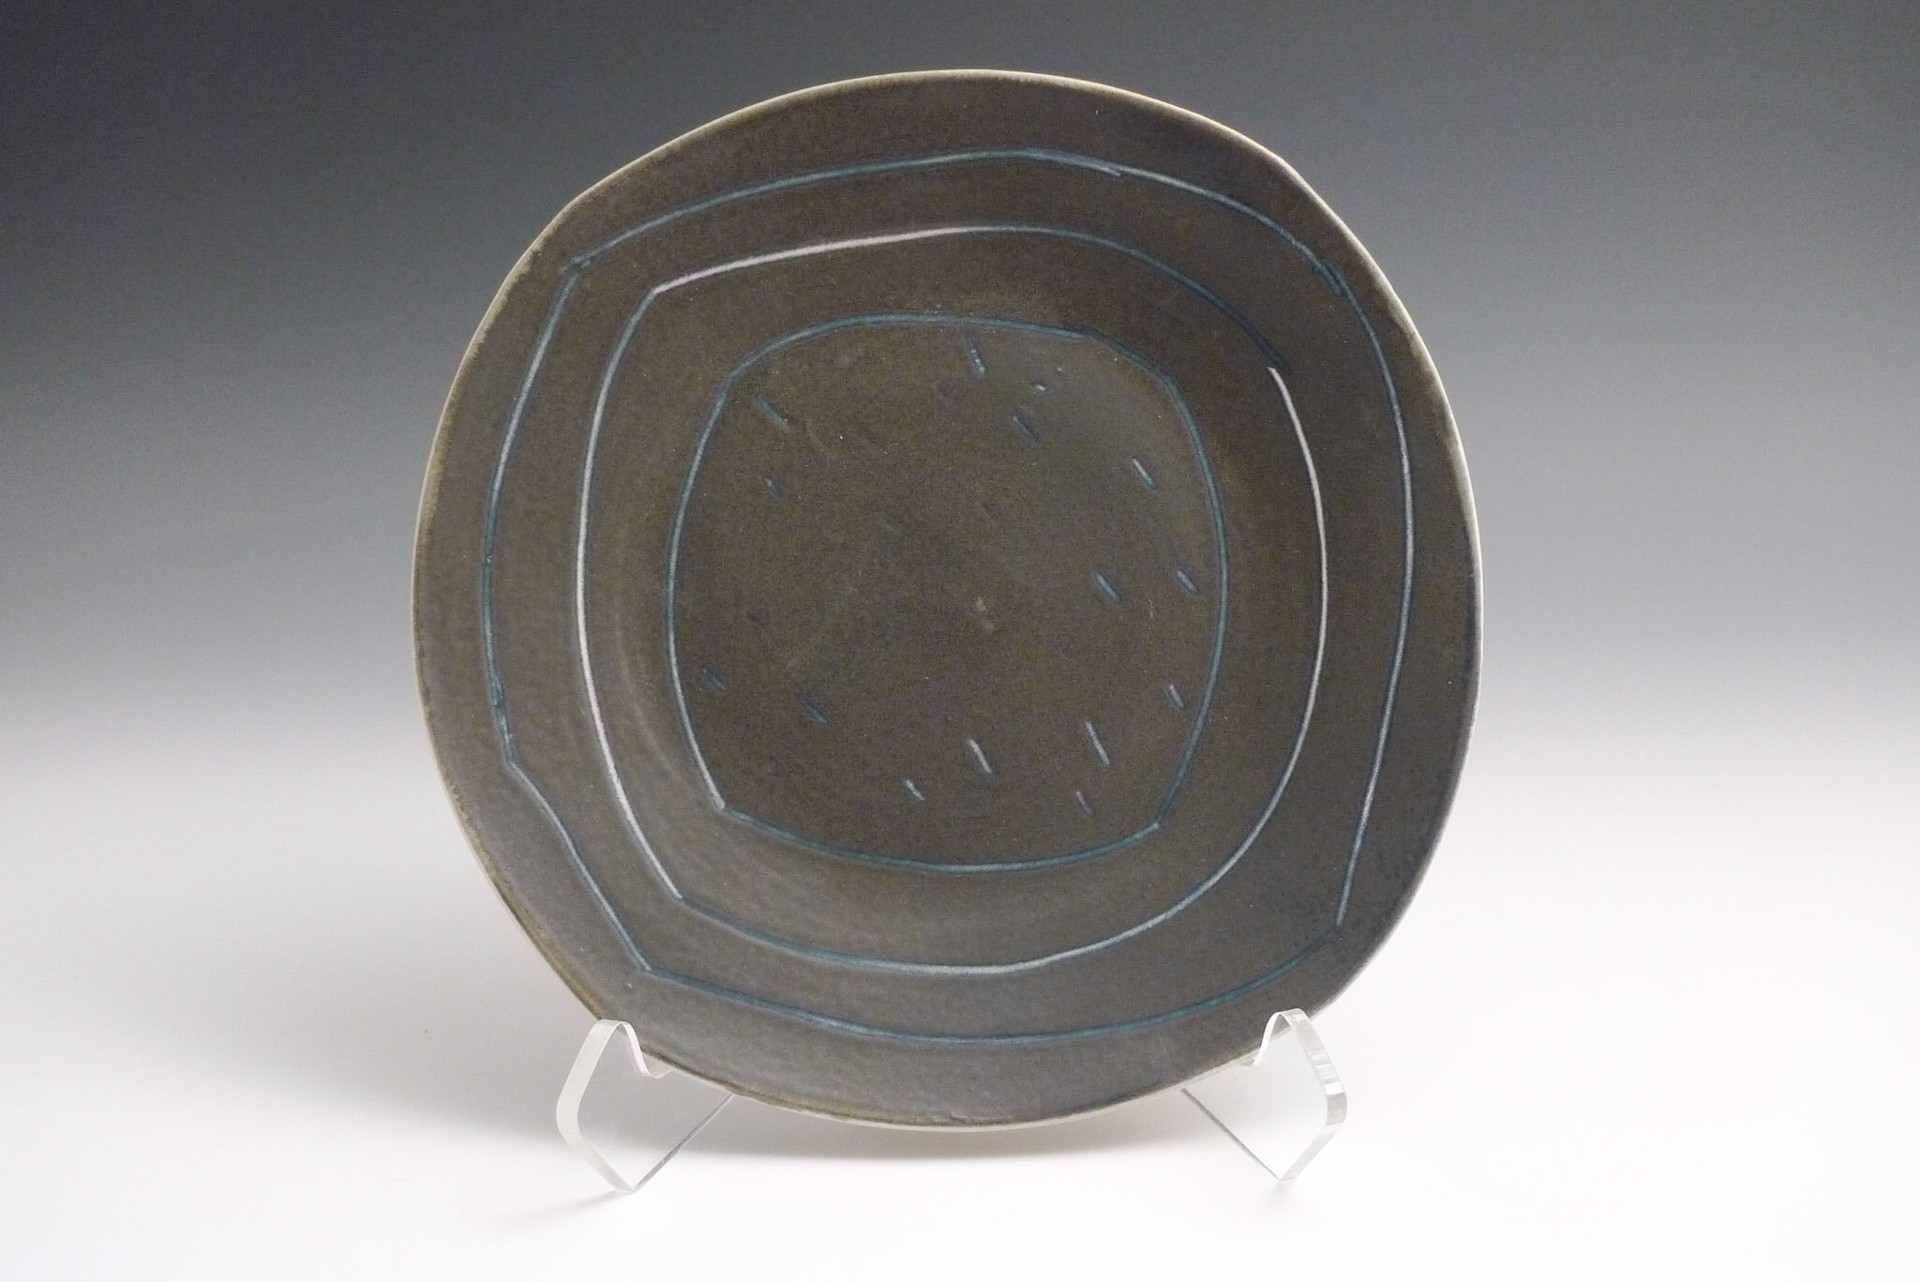 Plate by Delores Fortuna